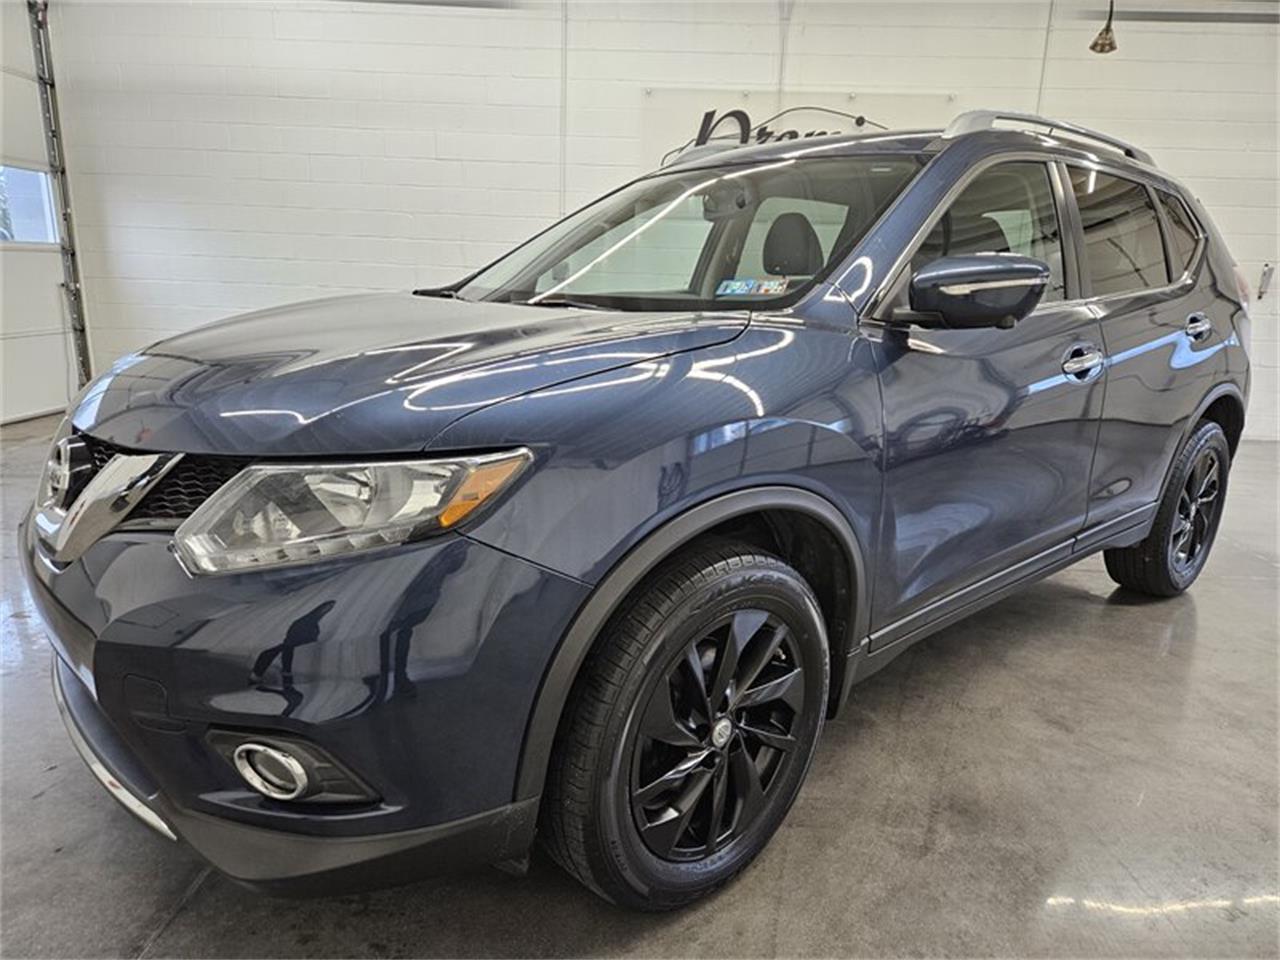 For Sale: 2015 Nissan Rogue in Spring City, Pennsylvania for sale in Spring City, PA